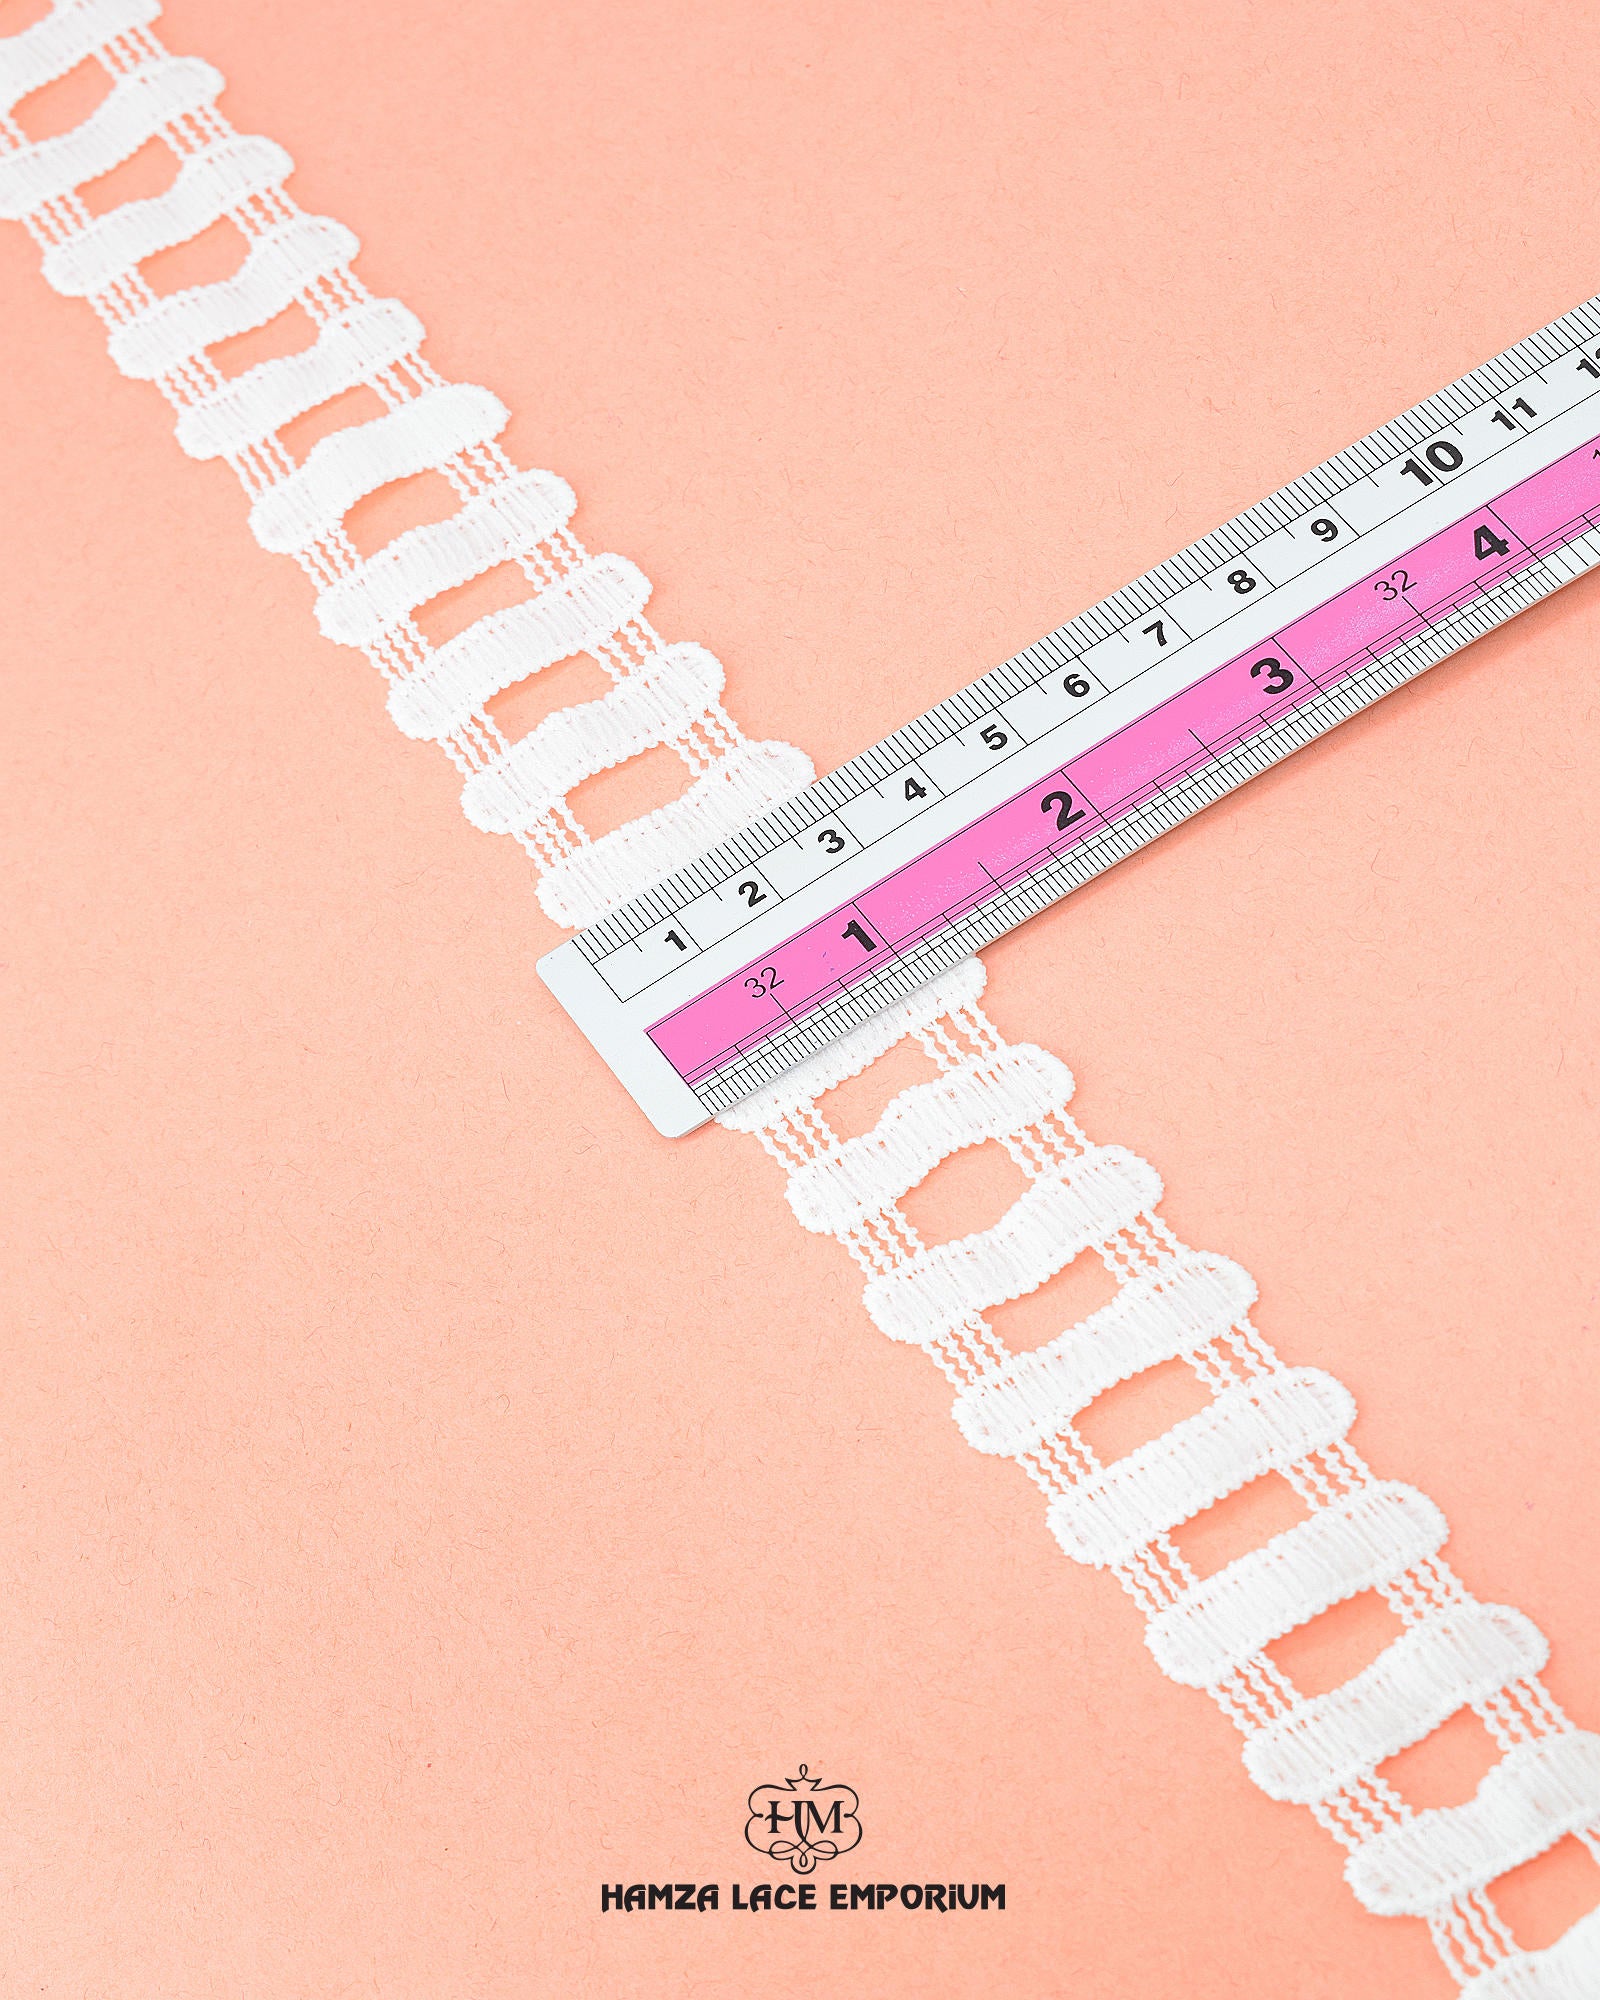 Size of the 'Center Filling Lace 23547' is given as 1.25 inches with the help of a ruler